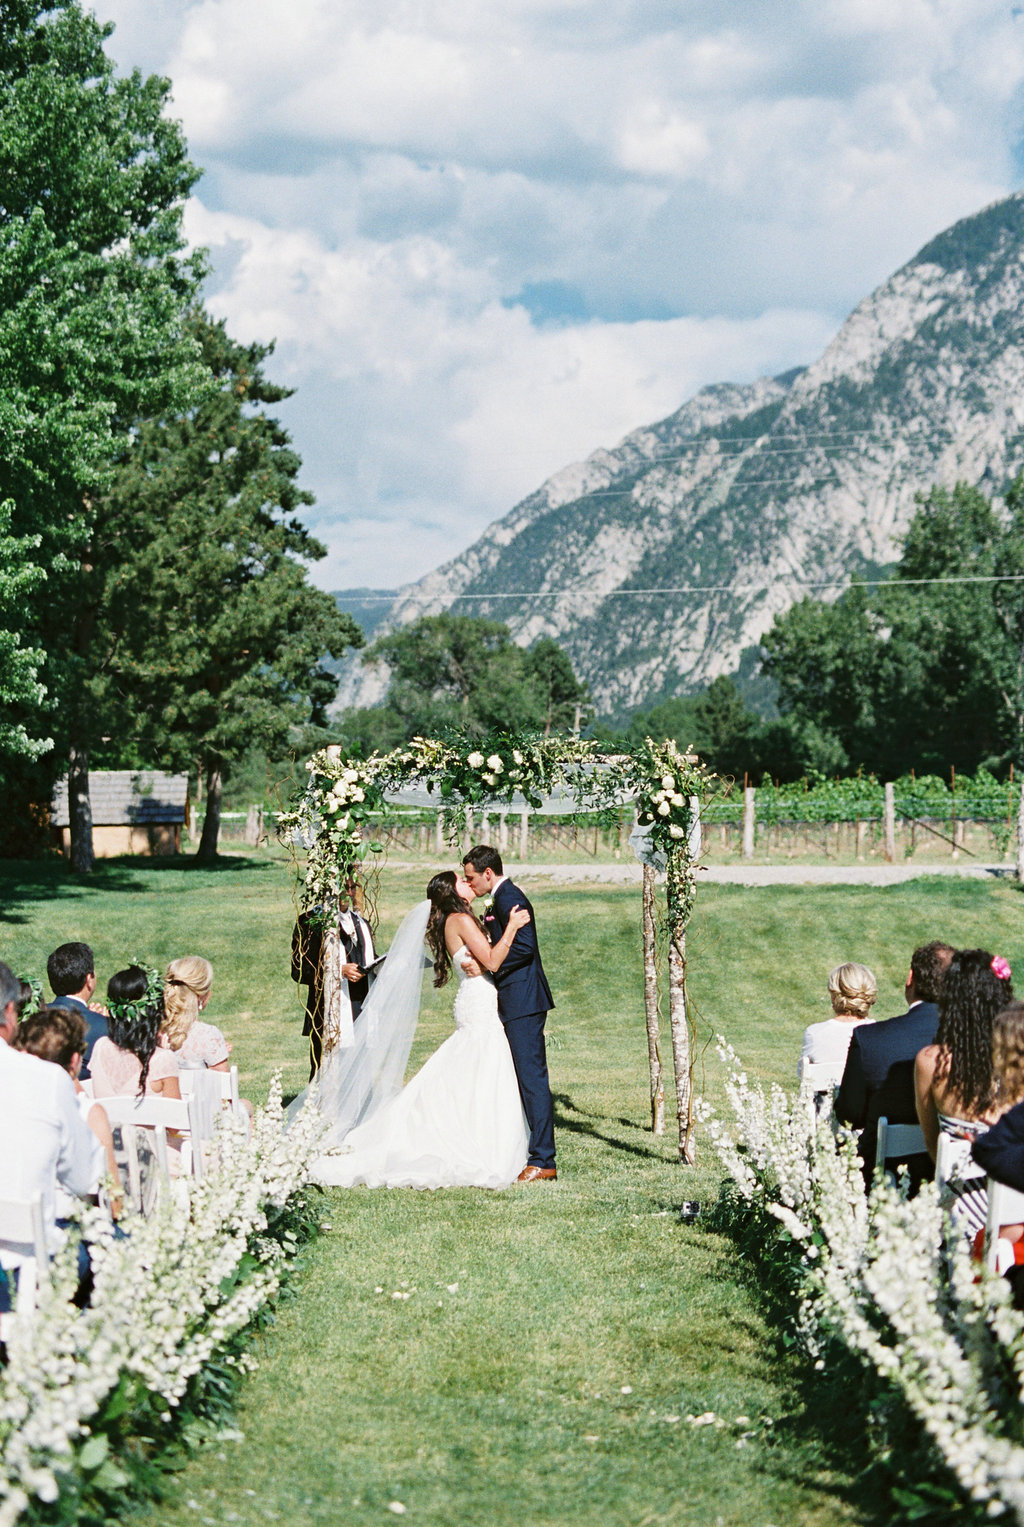 La Caille Wedding | Portuguese Inspired Wedding | Michelle Leo Events | Utah Event Planner and Designer | Jacque Lynn Photography 